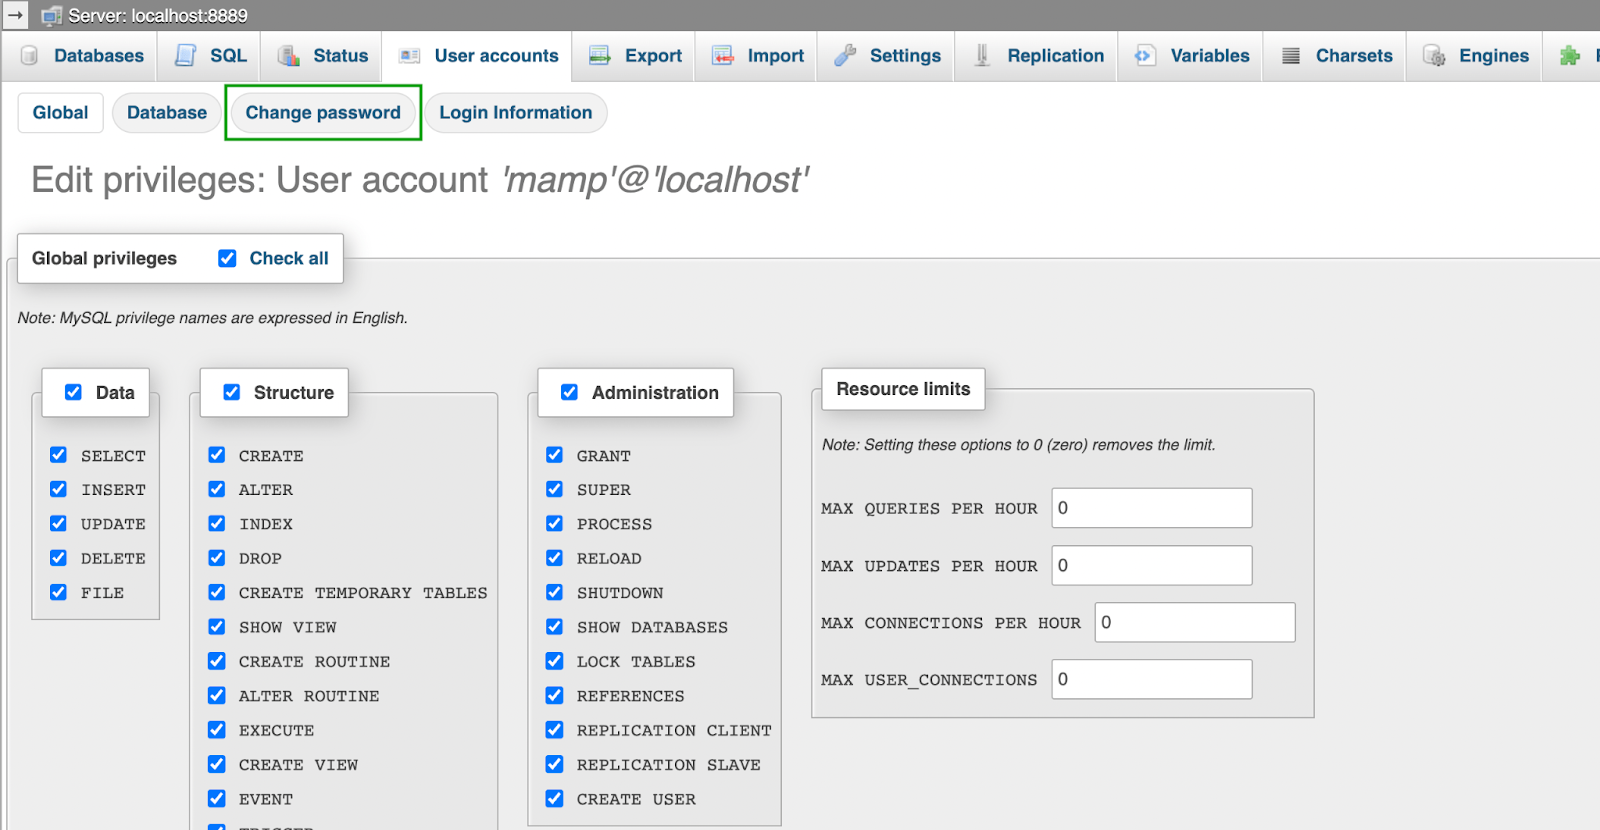 Locate the account with the username mamp, and click on Edit privileges → Change password.